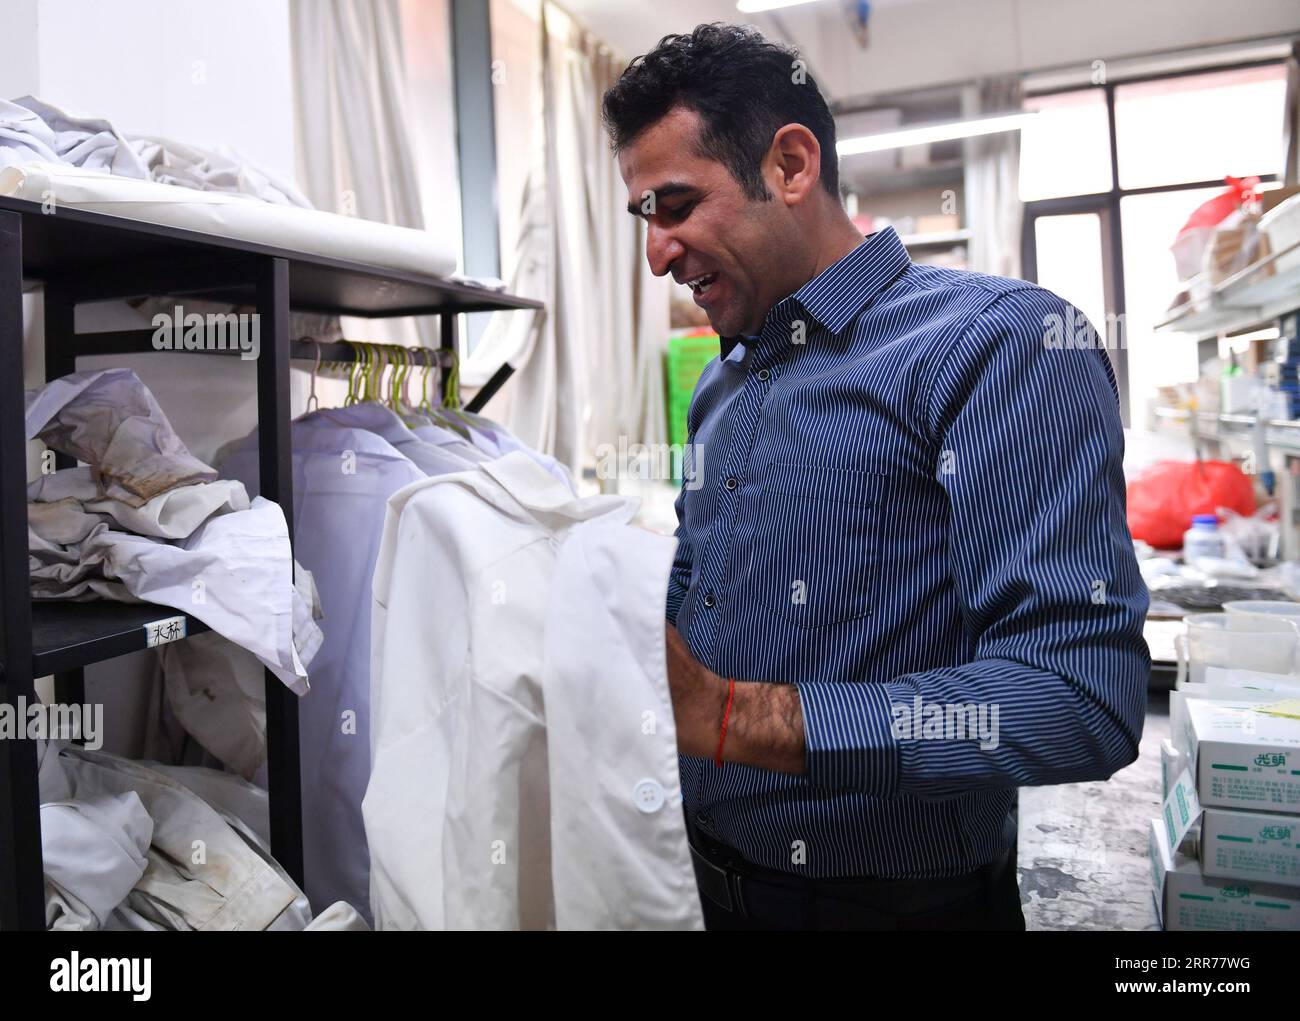 210318 -- XI AN, March 18, 2021 -- Abdul Ghaffar Shar makes preparation for an experiment at a laboratory of Northwest Agriculture and Forestry University NWAFU in Yangling, northwest China s Shaanxi Province, March 17, 2021. Abdul Ghaffar Shar, 30, is a Pakistani doctoral student in China s Northwest Agriculture and Forestry University NWAFU. Shar is doing plant nutrition research for his doctoral degree. After receiving his bachelor s degree in agriculture from Sindh Agriculture University in Pakistan in 2014, Shar decided to further his studies in China s NWAFU. Shar has learned to speak Ma Stock Photo